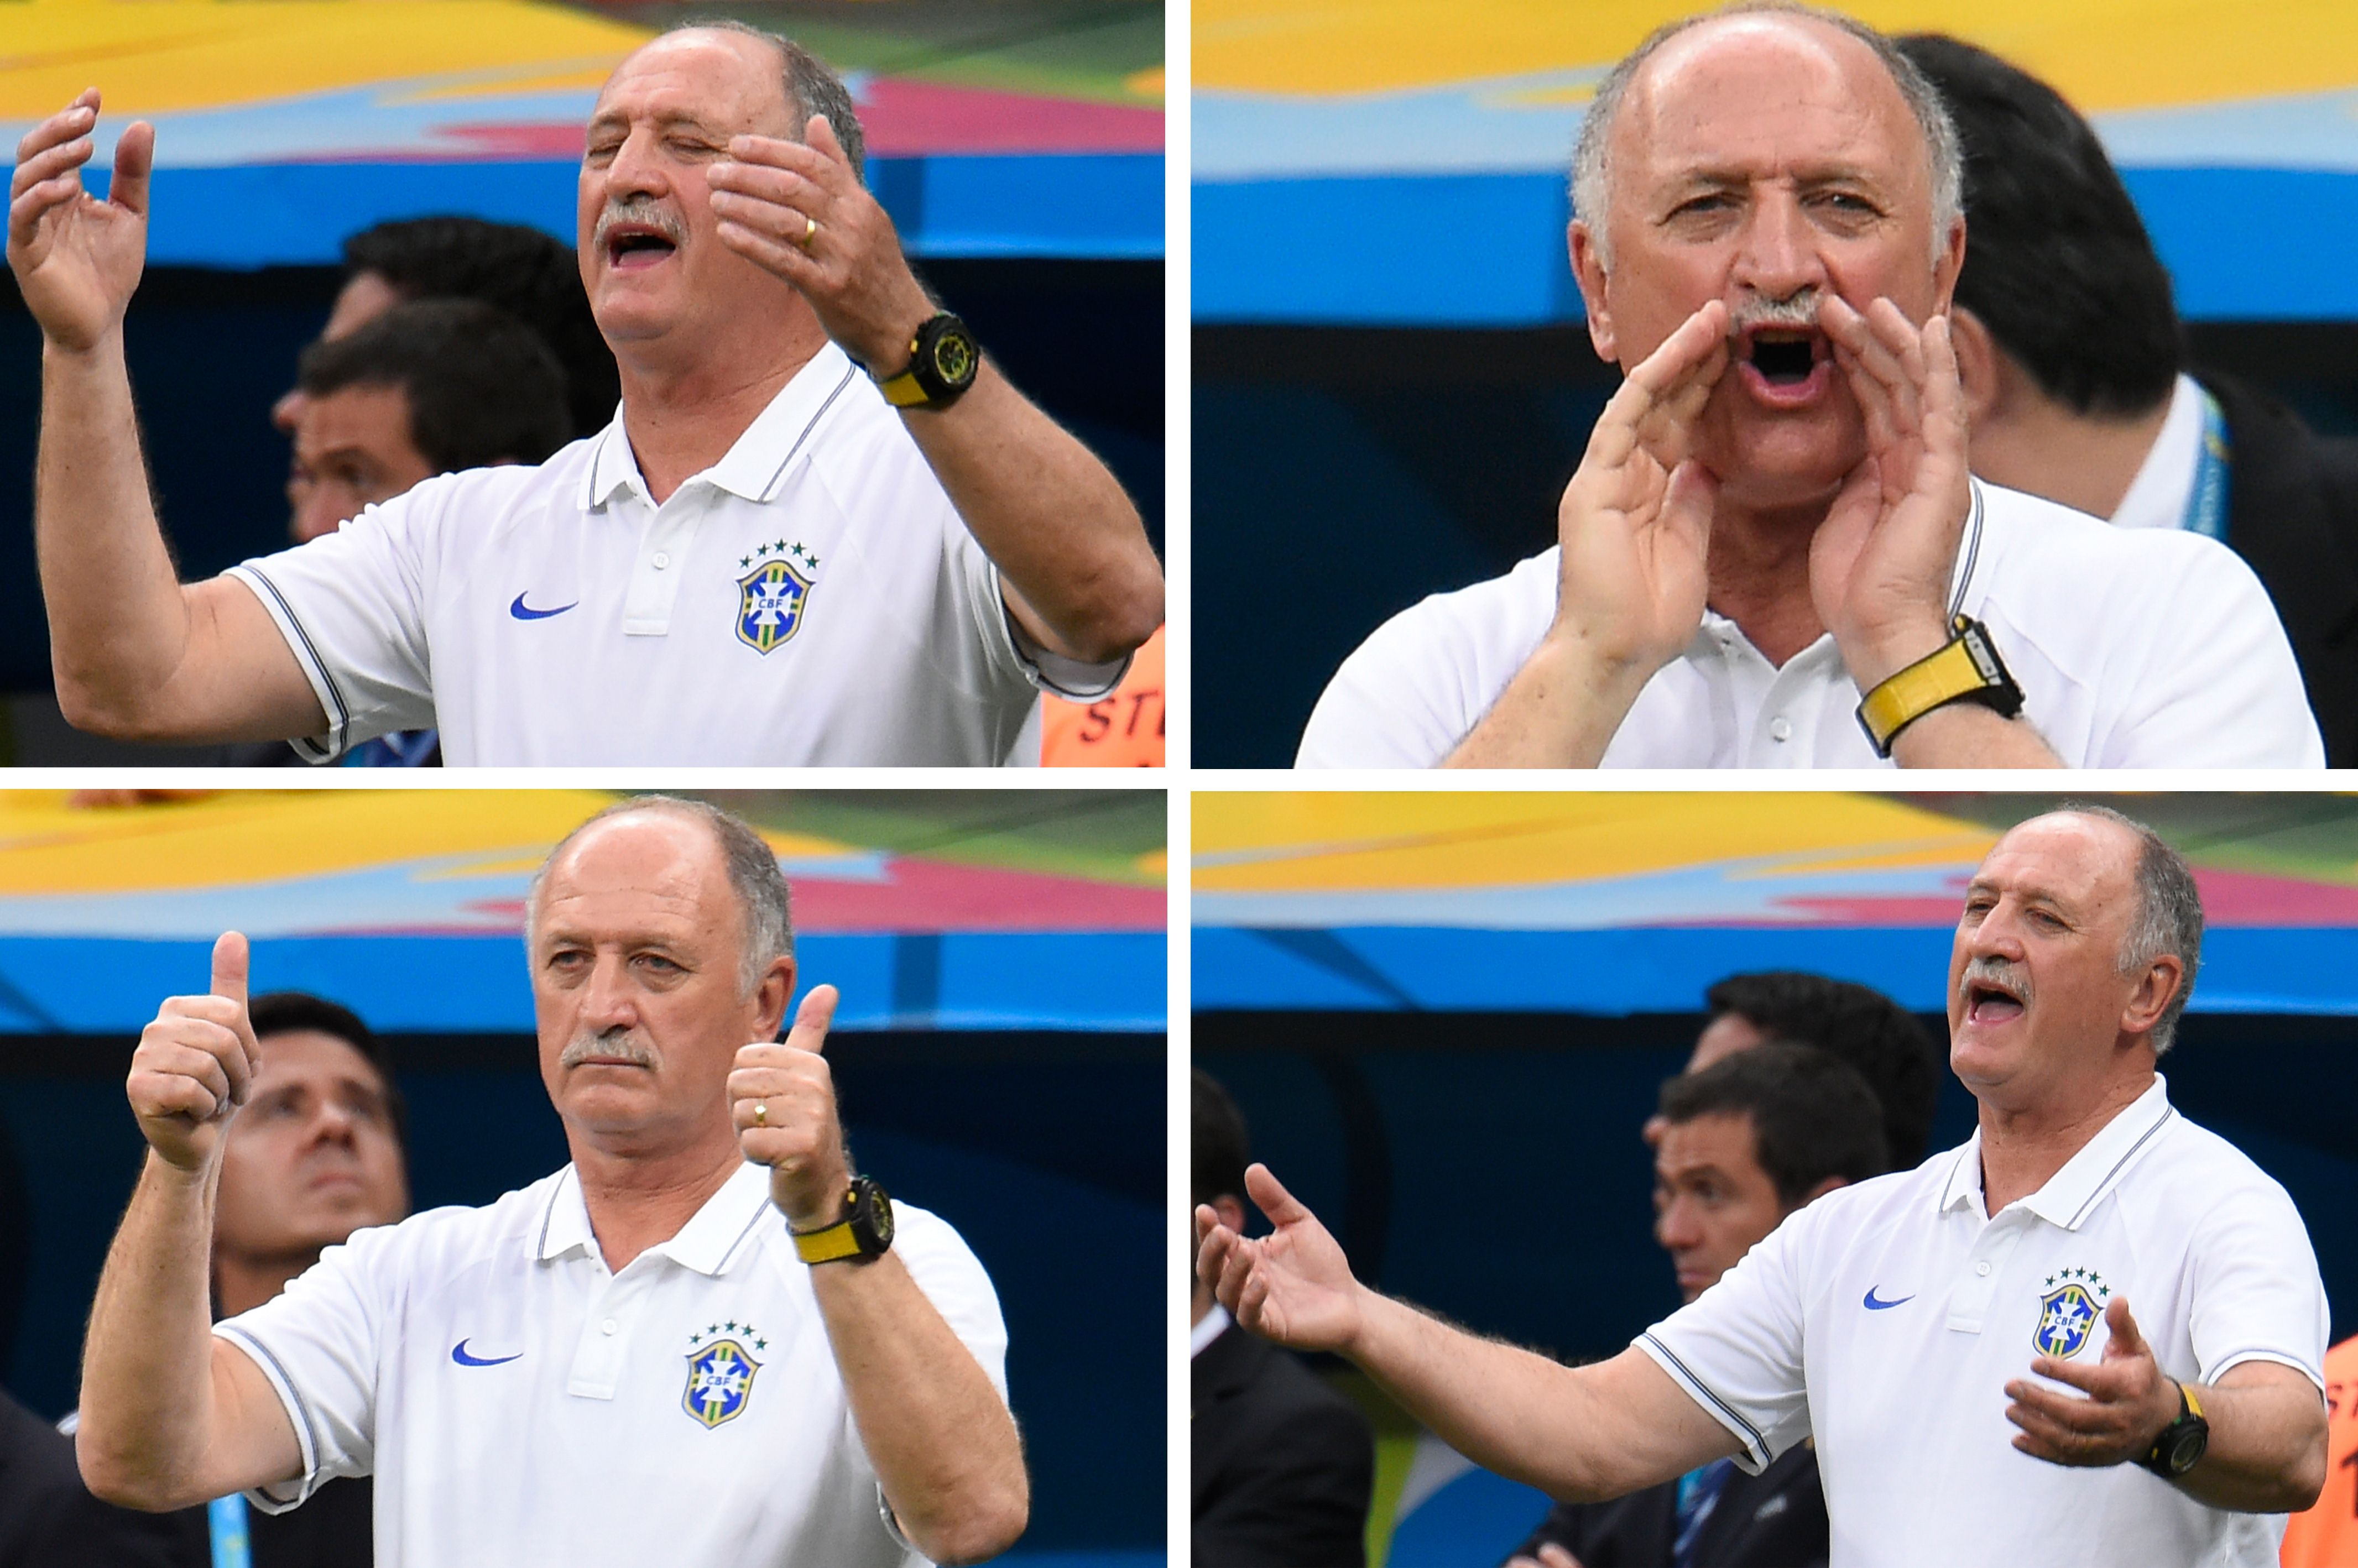 Luiz Felipe Scolari won the 2002 World Cup, but presided over Brazil's worst-ever defeat at this one. Photo: AFP